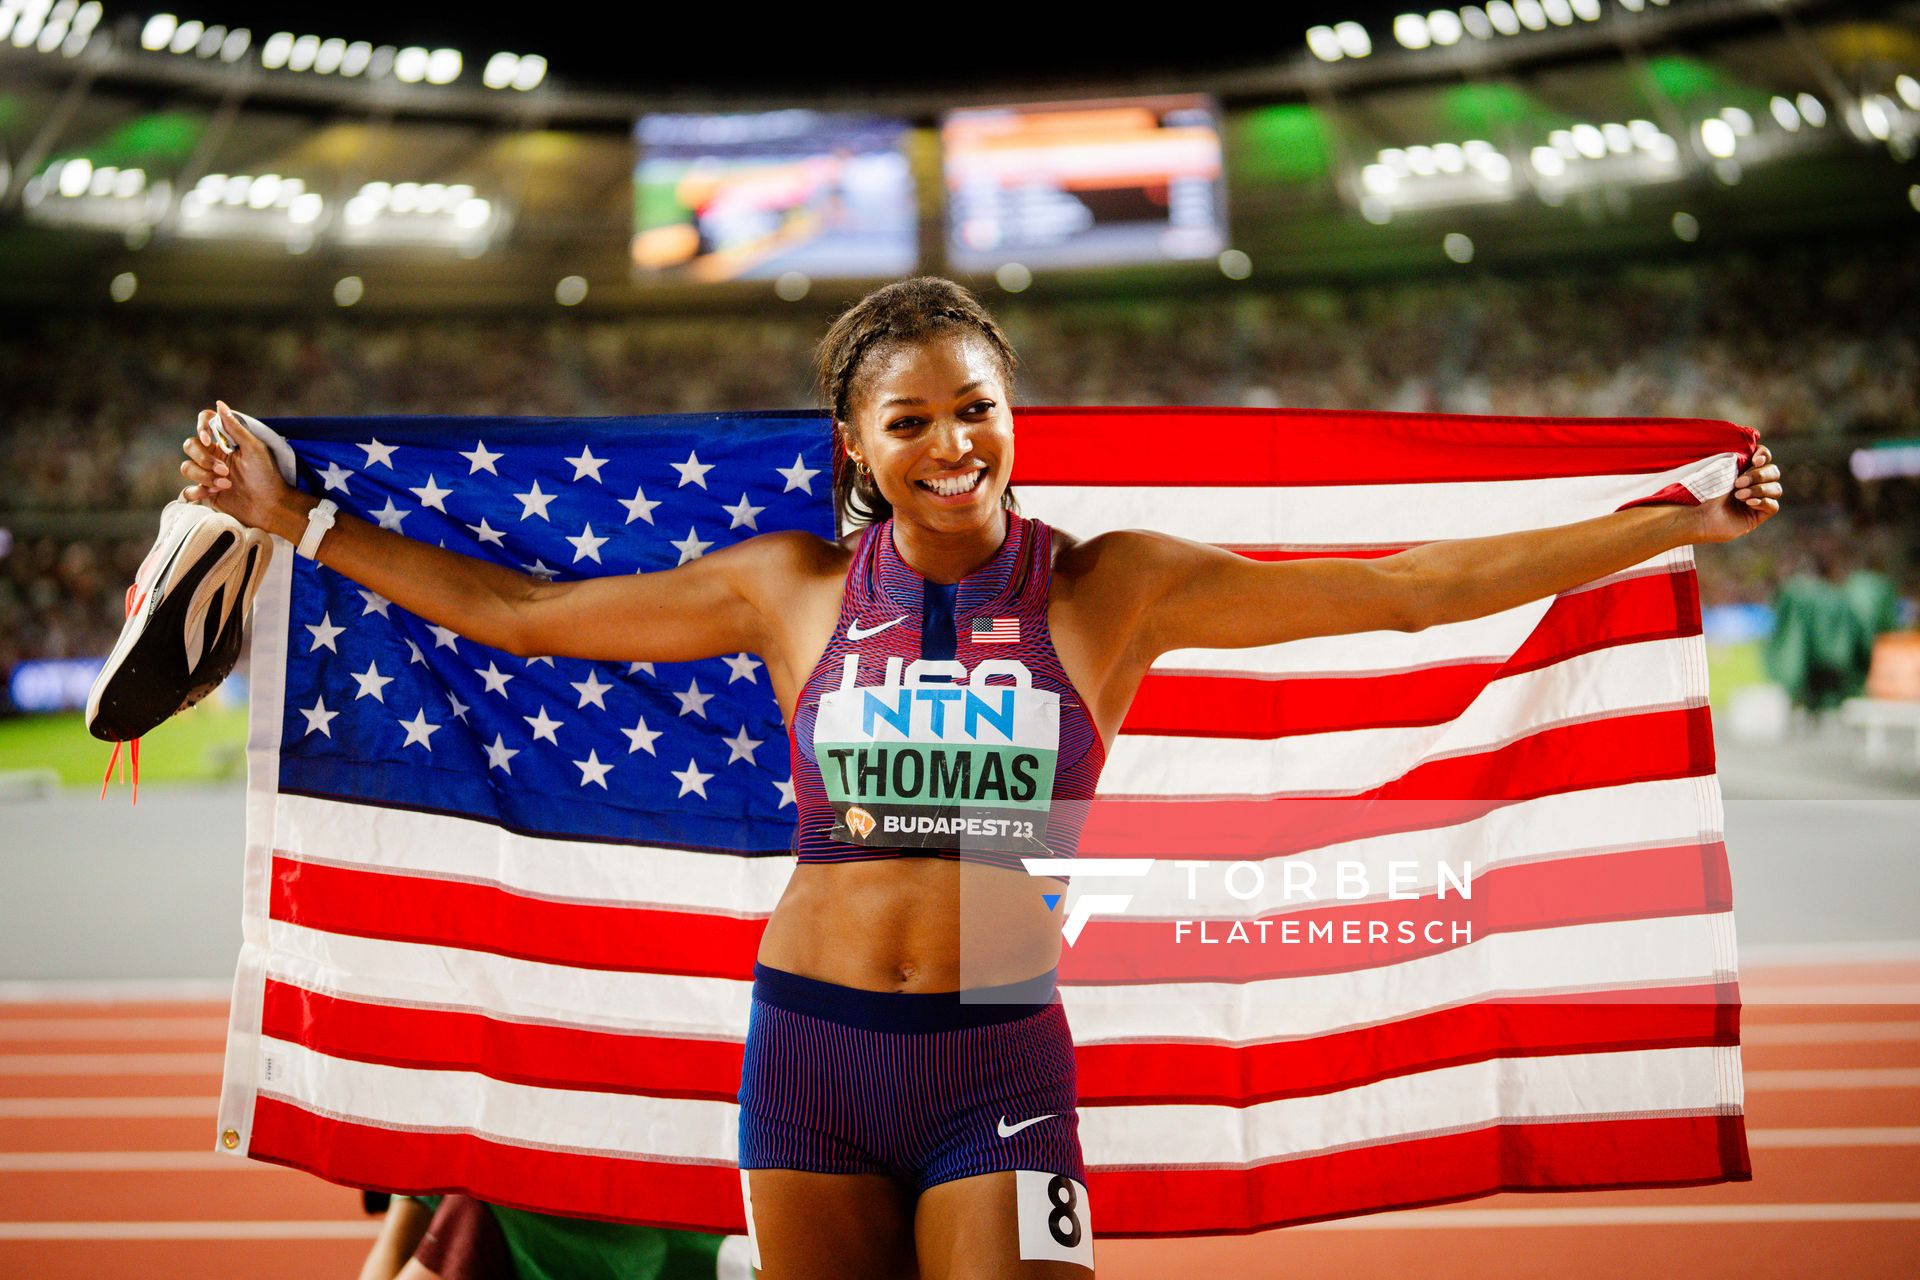 Gabrielle Thomas (USA/United States) on Day 7 of the World Athletics Championships Budapest 23 at the National Athletics Centre in Budapest, Hungary on August 25, 2023.